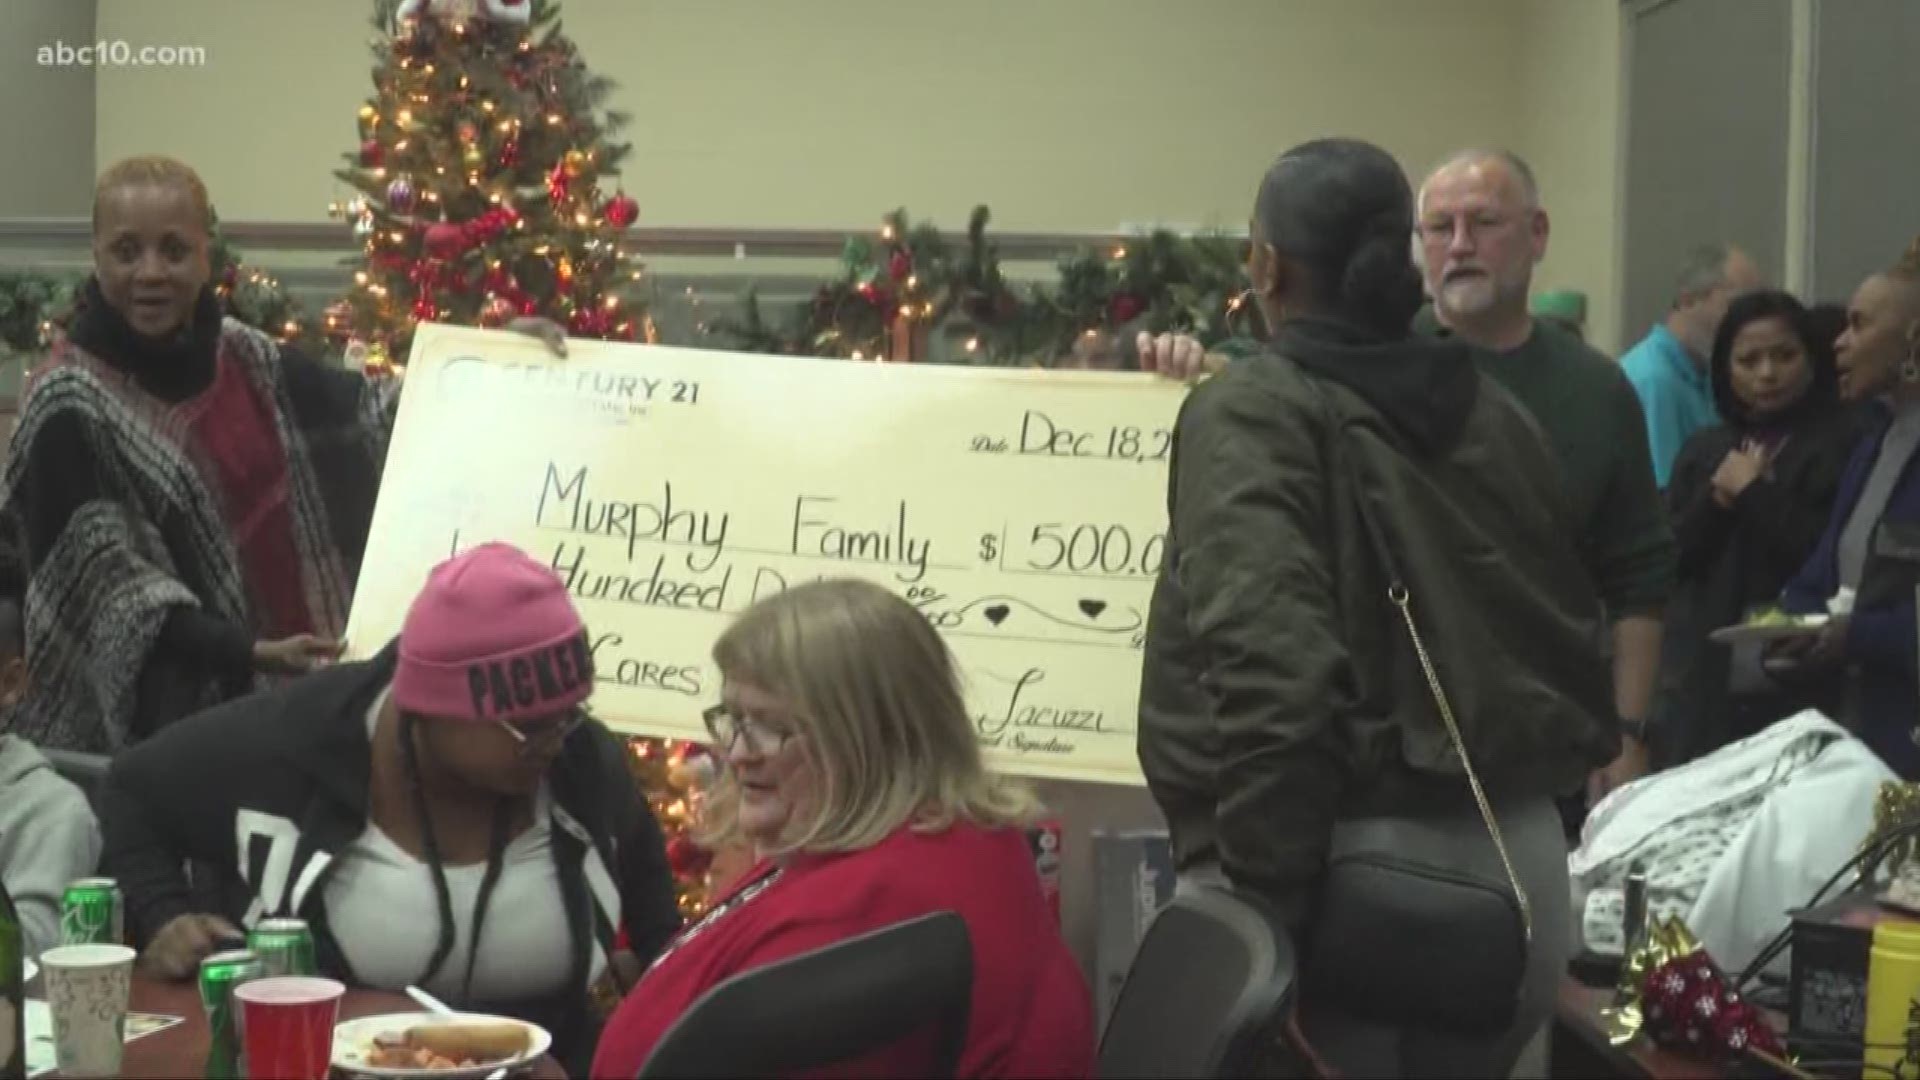 Three families were invited to a Christmas party at Century 21 off Florin Road, but little did they know, there was an even bigger gift to celebrate.